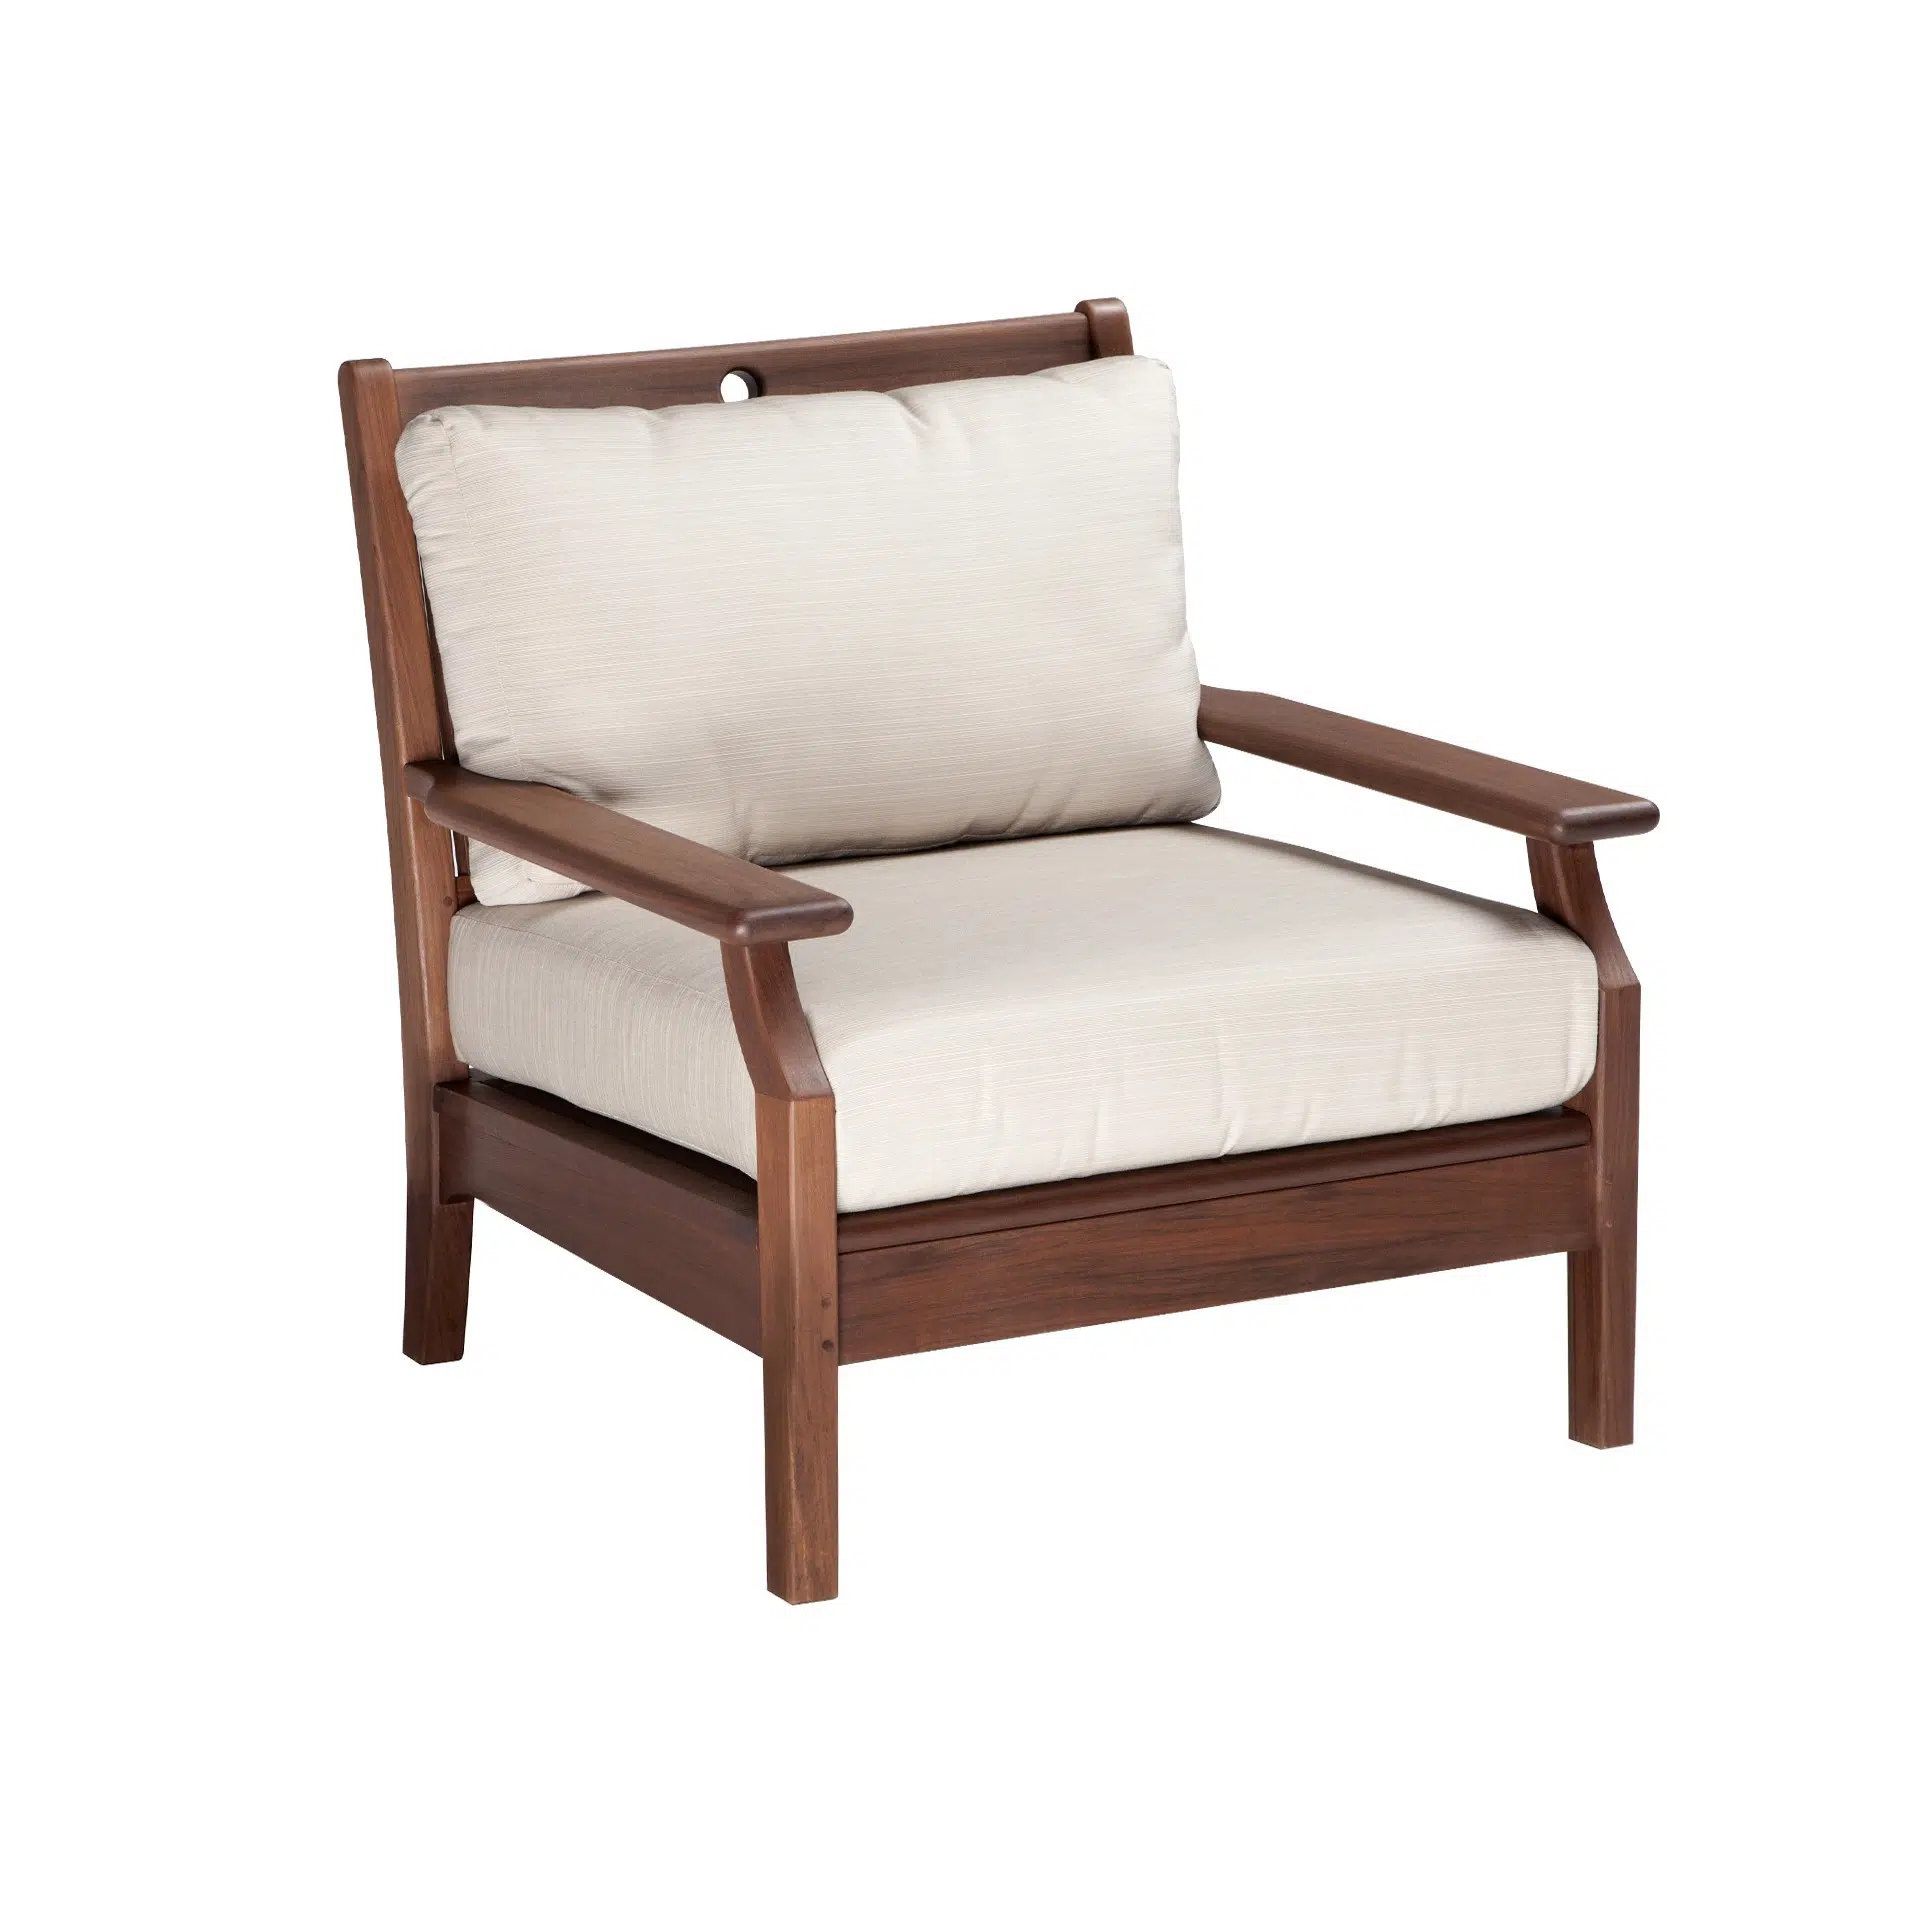 Opal loung chair from hausers patio luxury outdoor living by hausers patio